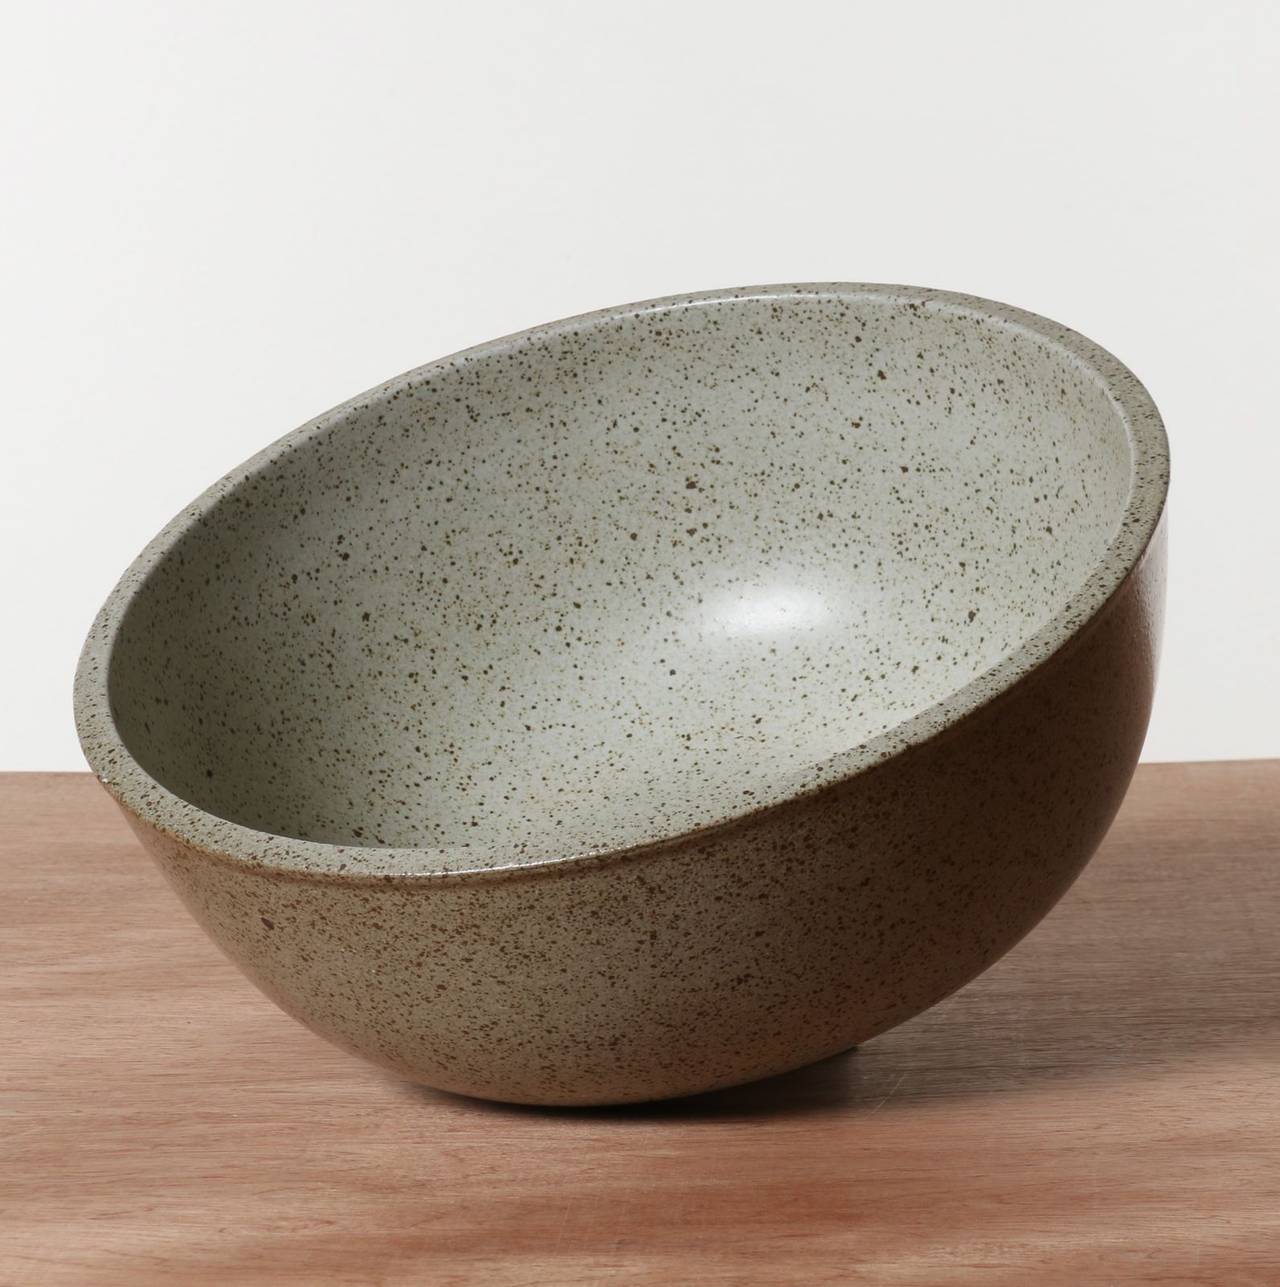 David Cressey Bowl for Architectural Pottery, Terra Major Gourmet-Ware 2